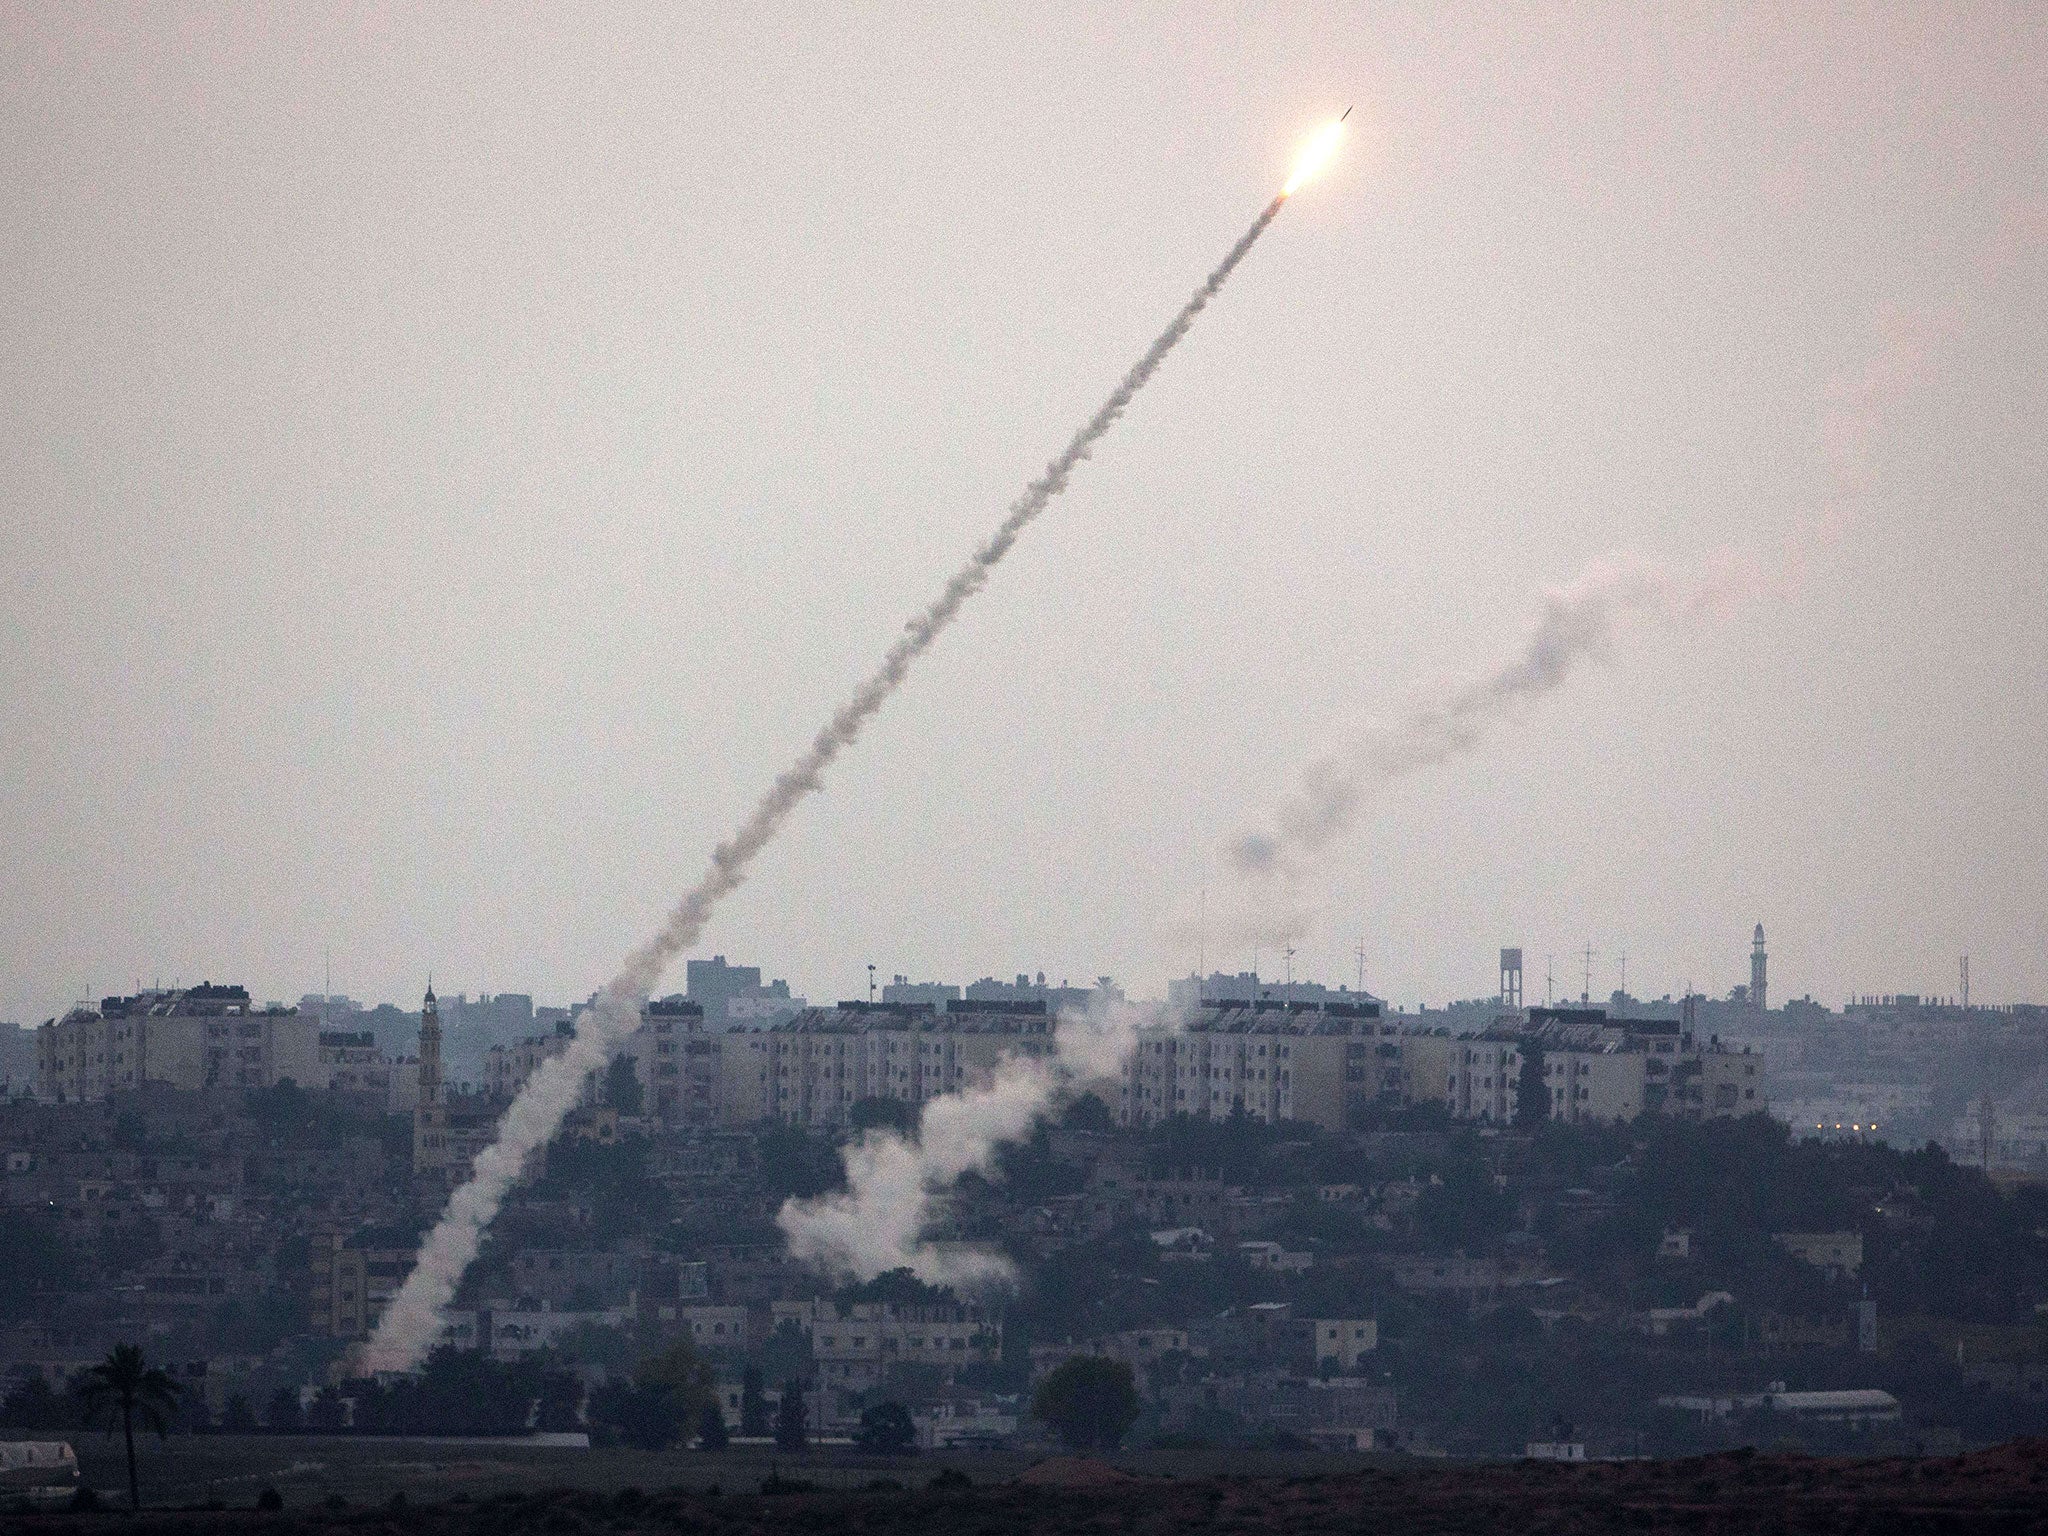 A picture taken from the southern Israeli Gaza border shows a rocket being launched from the Gaza strip into Israel, on July 11, 2014